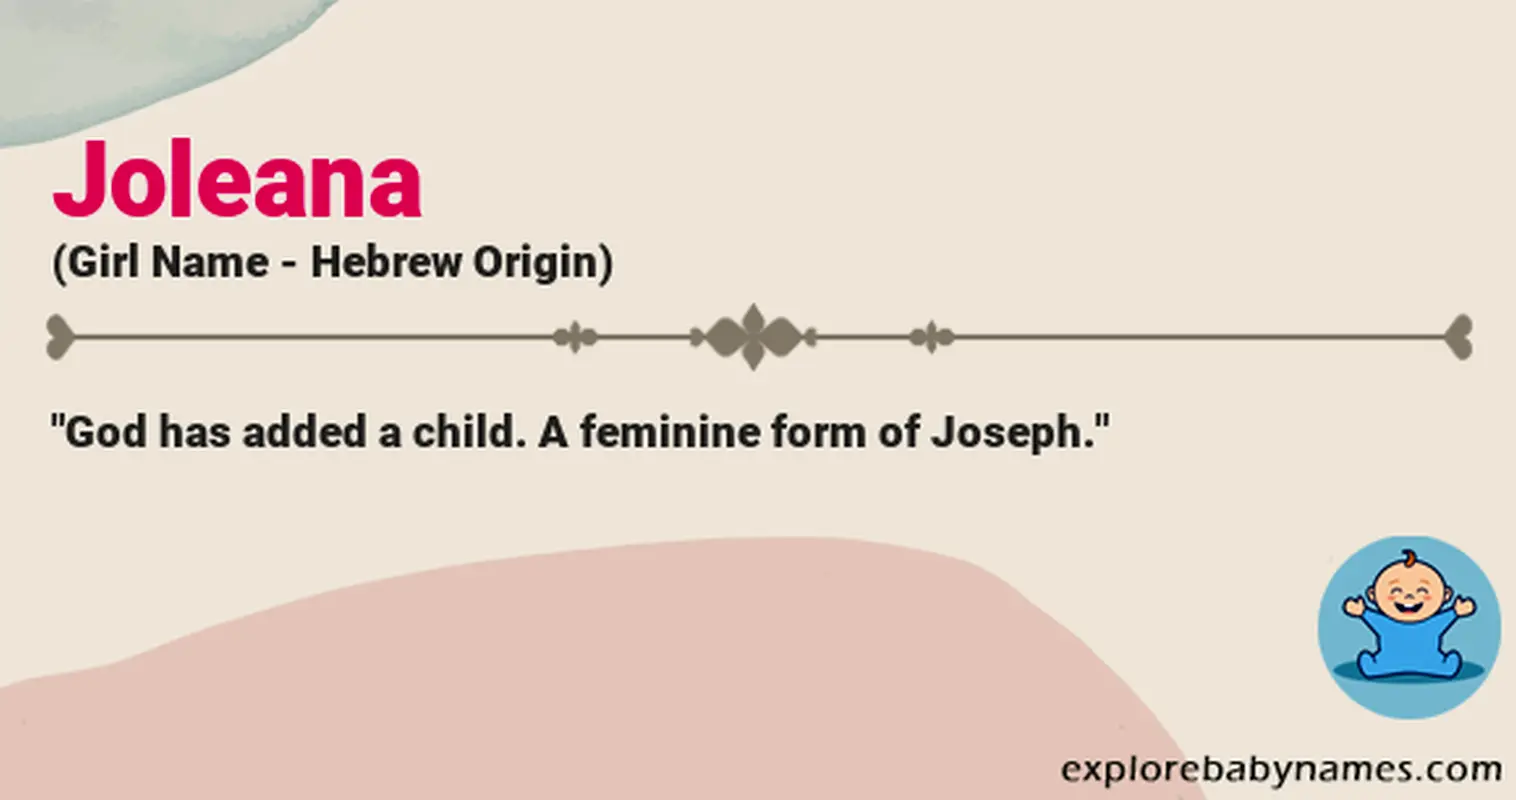 Meaning of Joleana